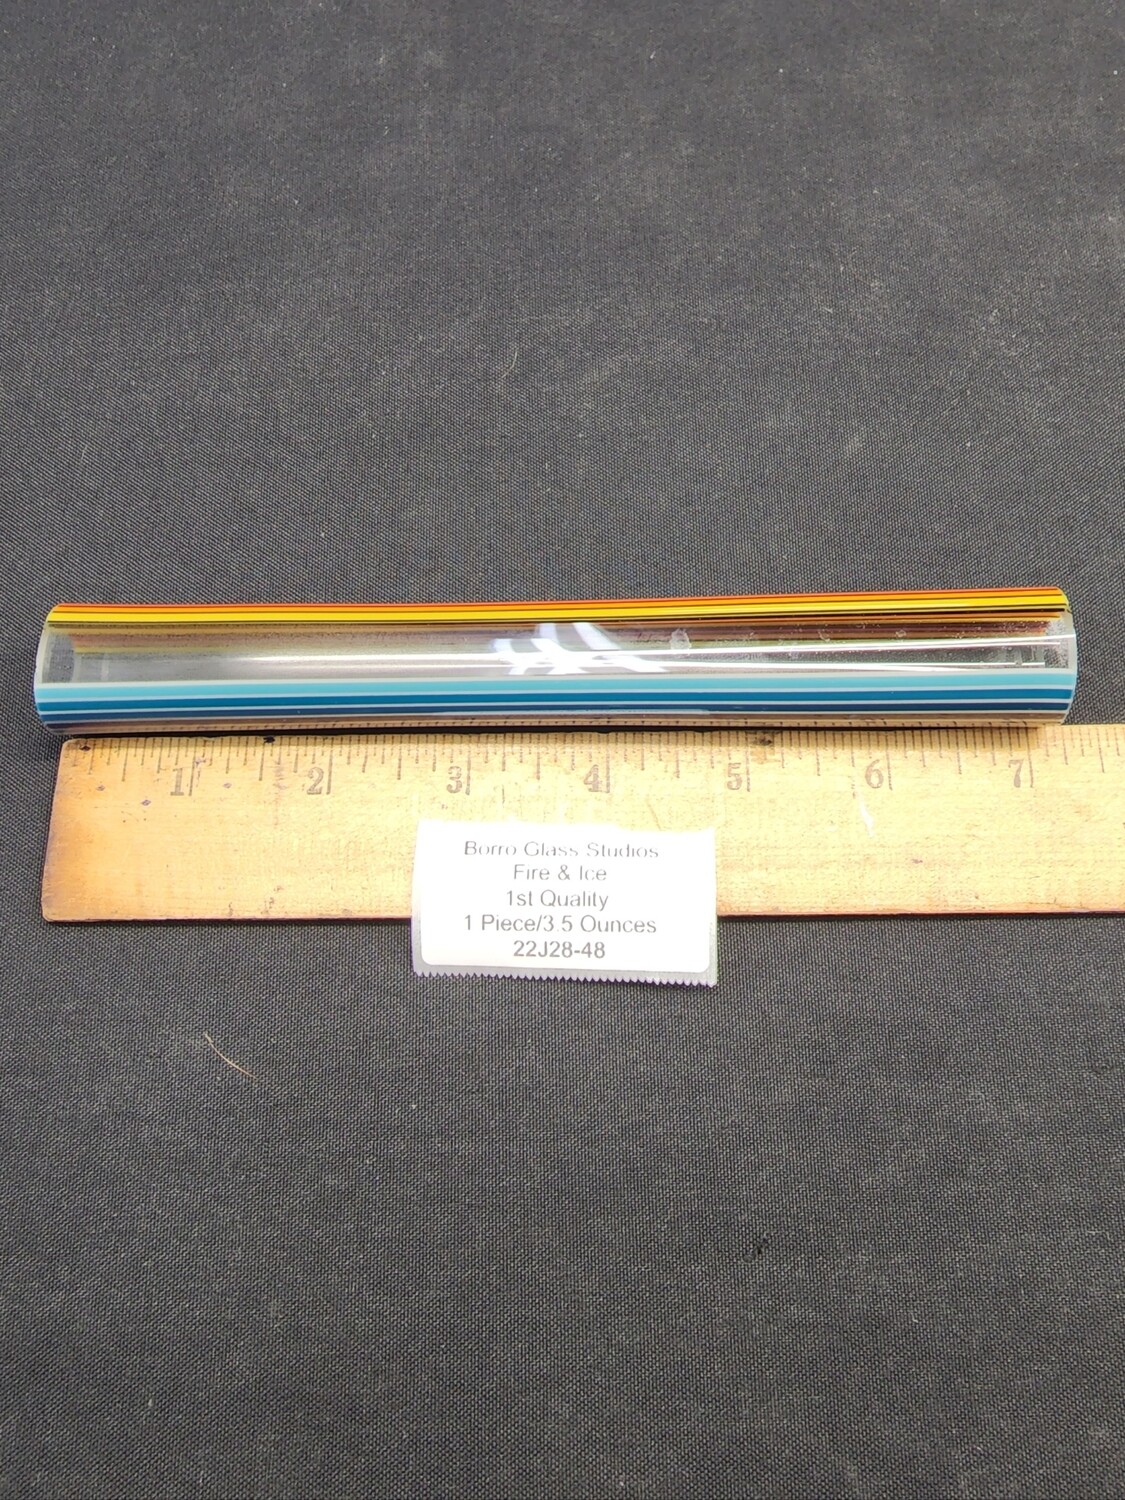 Fire & Ice Boro Vac Stacked Line Tubing - 1st Quality - 3.5 Ounces